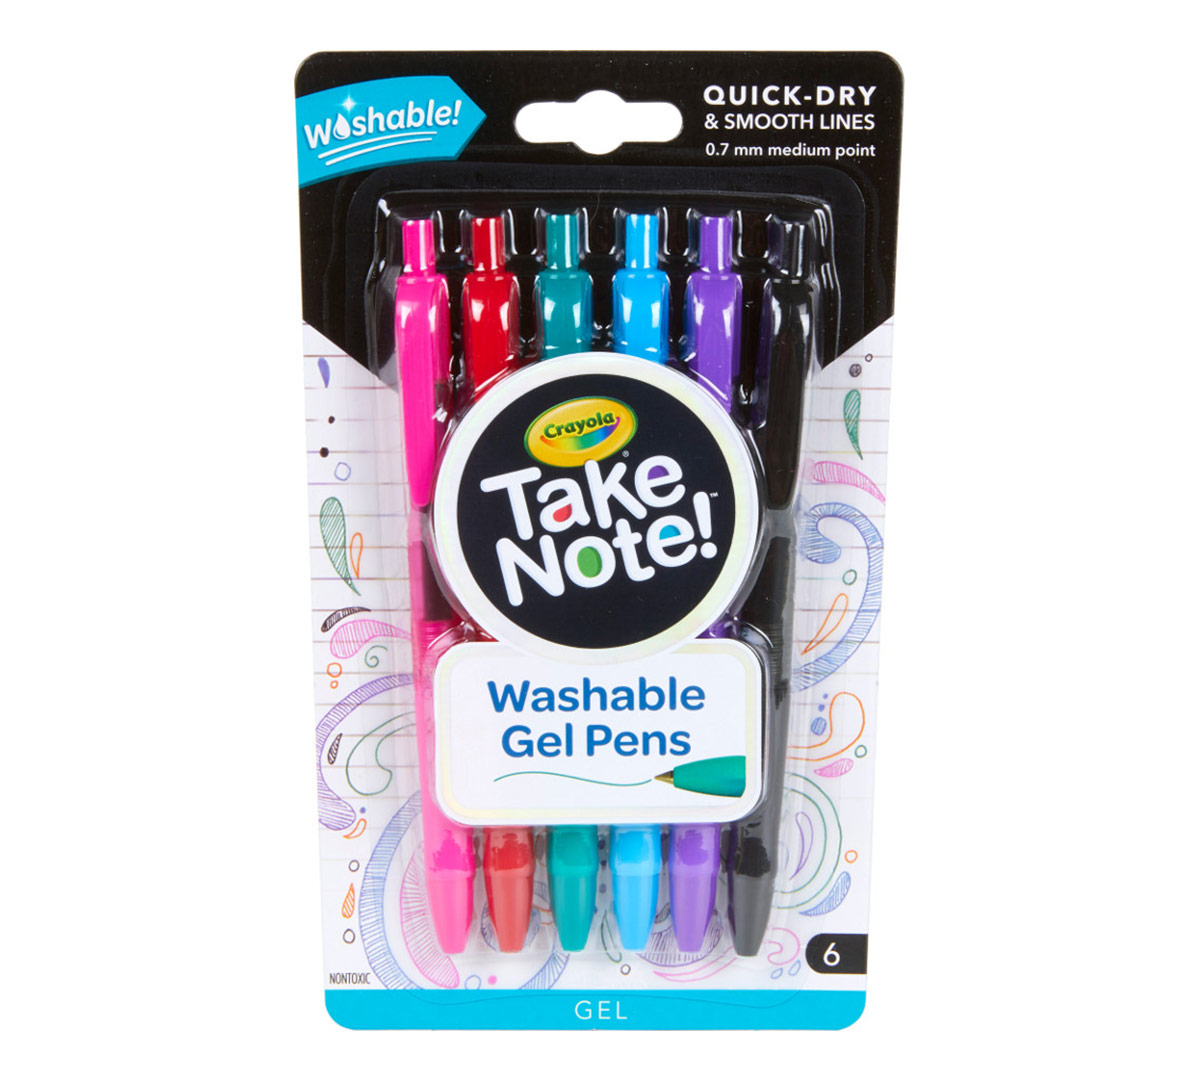 Review: Crayola Signature Markers, Colored Pencils, Gel Pens and Coloring  Book